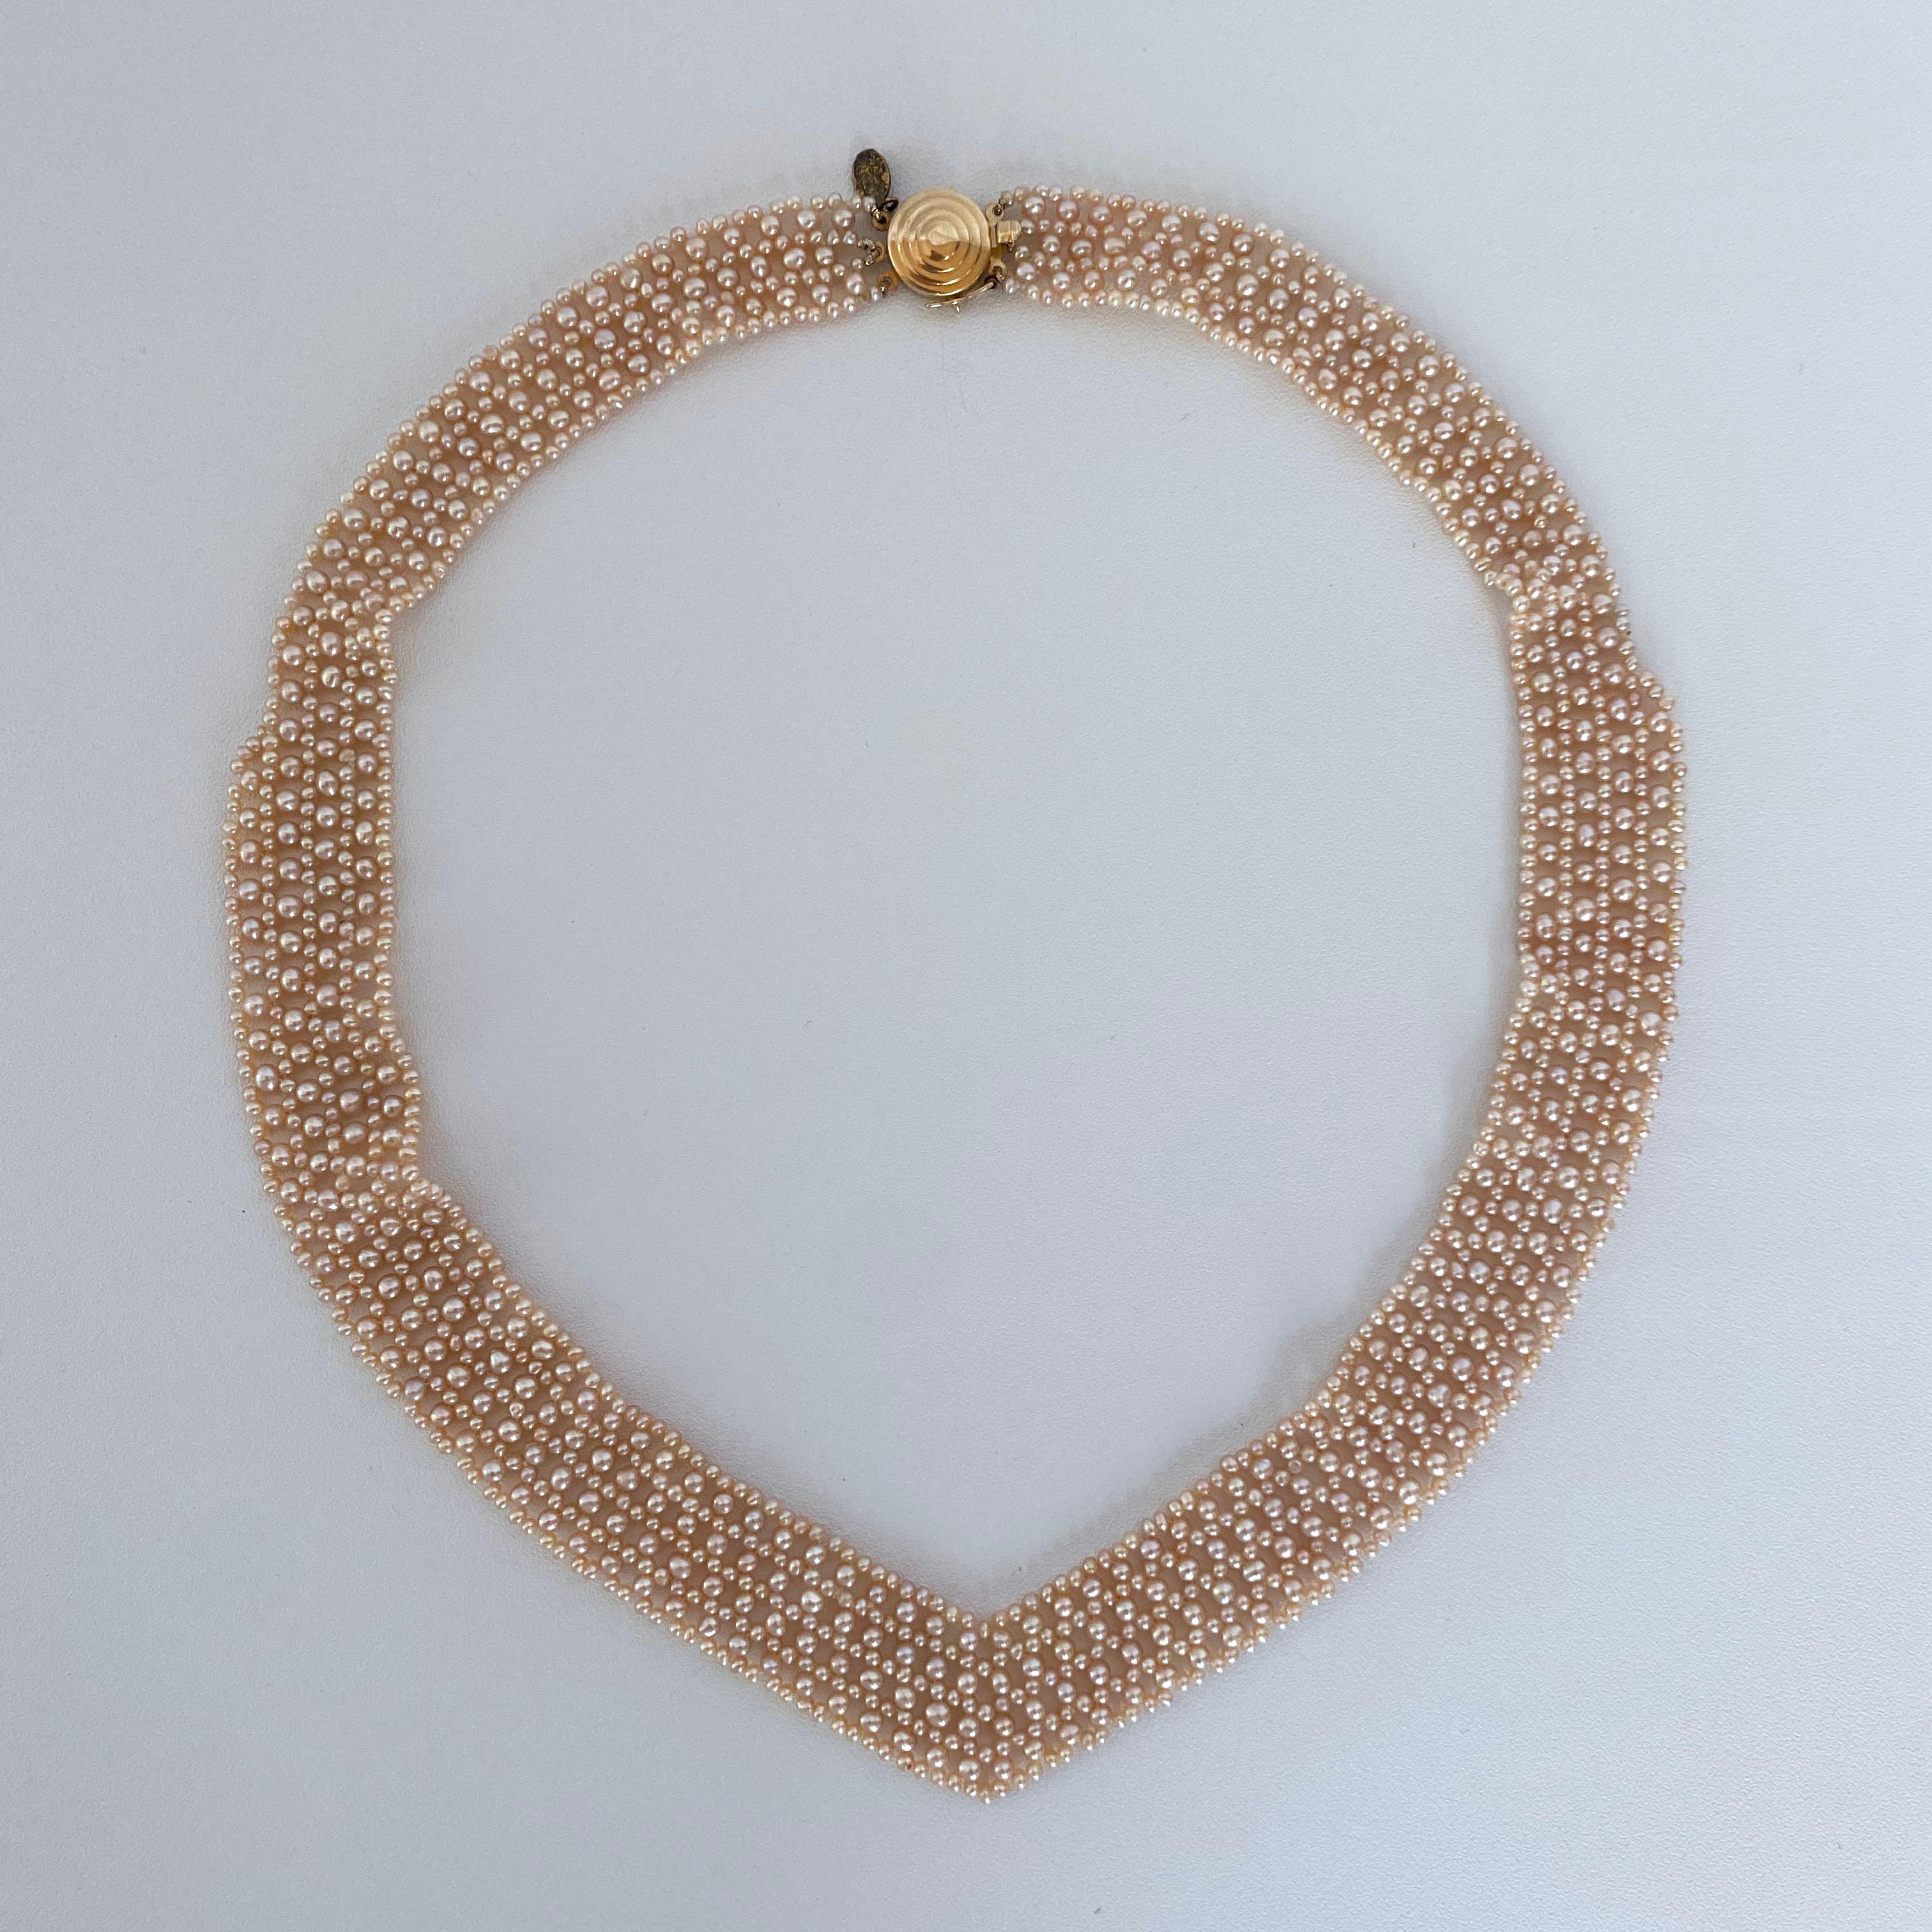 Marina J. Pink Pearl Woven 'V' Necklace with 14k Gold Clasp & Vintage Brooch 6